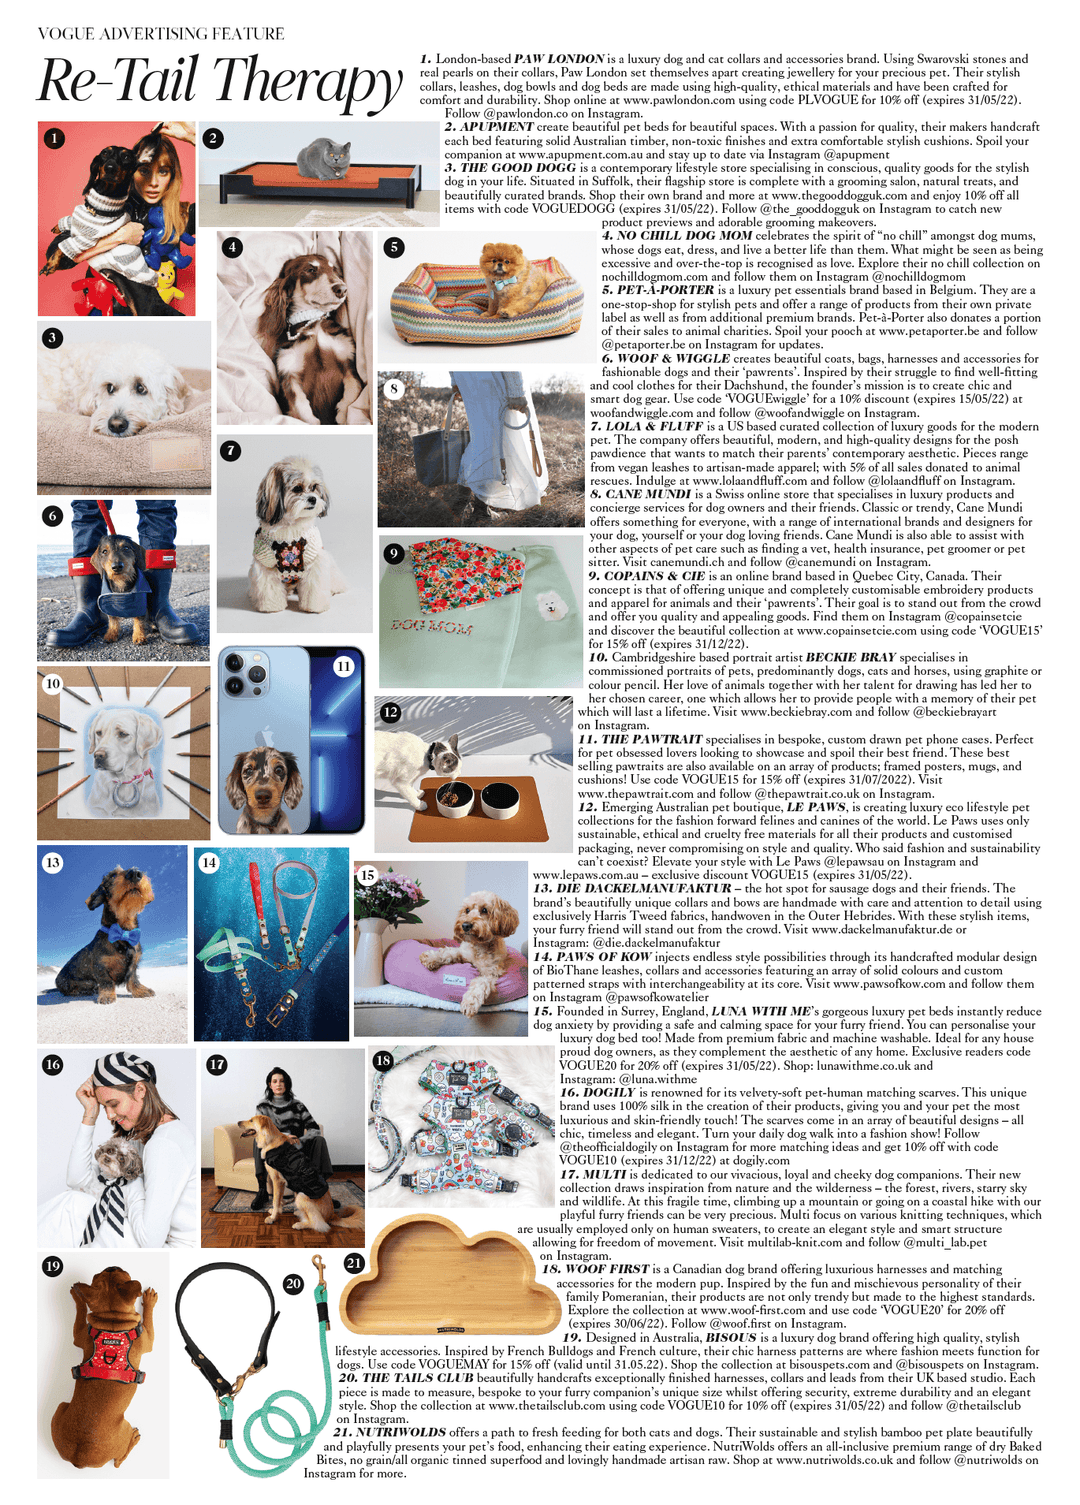 Bisous featured in British Vogue - Bisous Pets